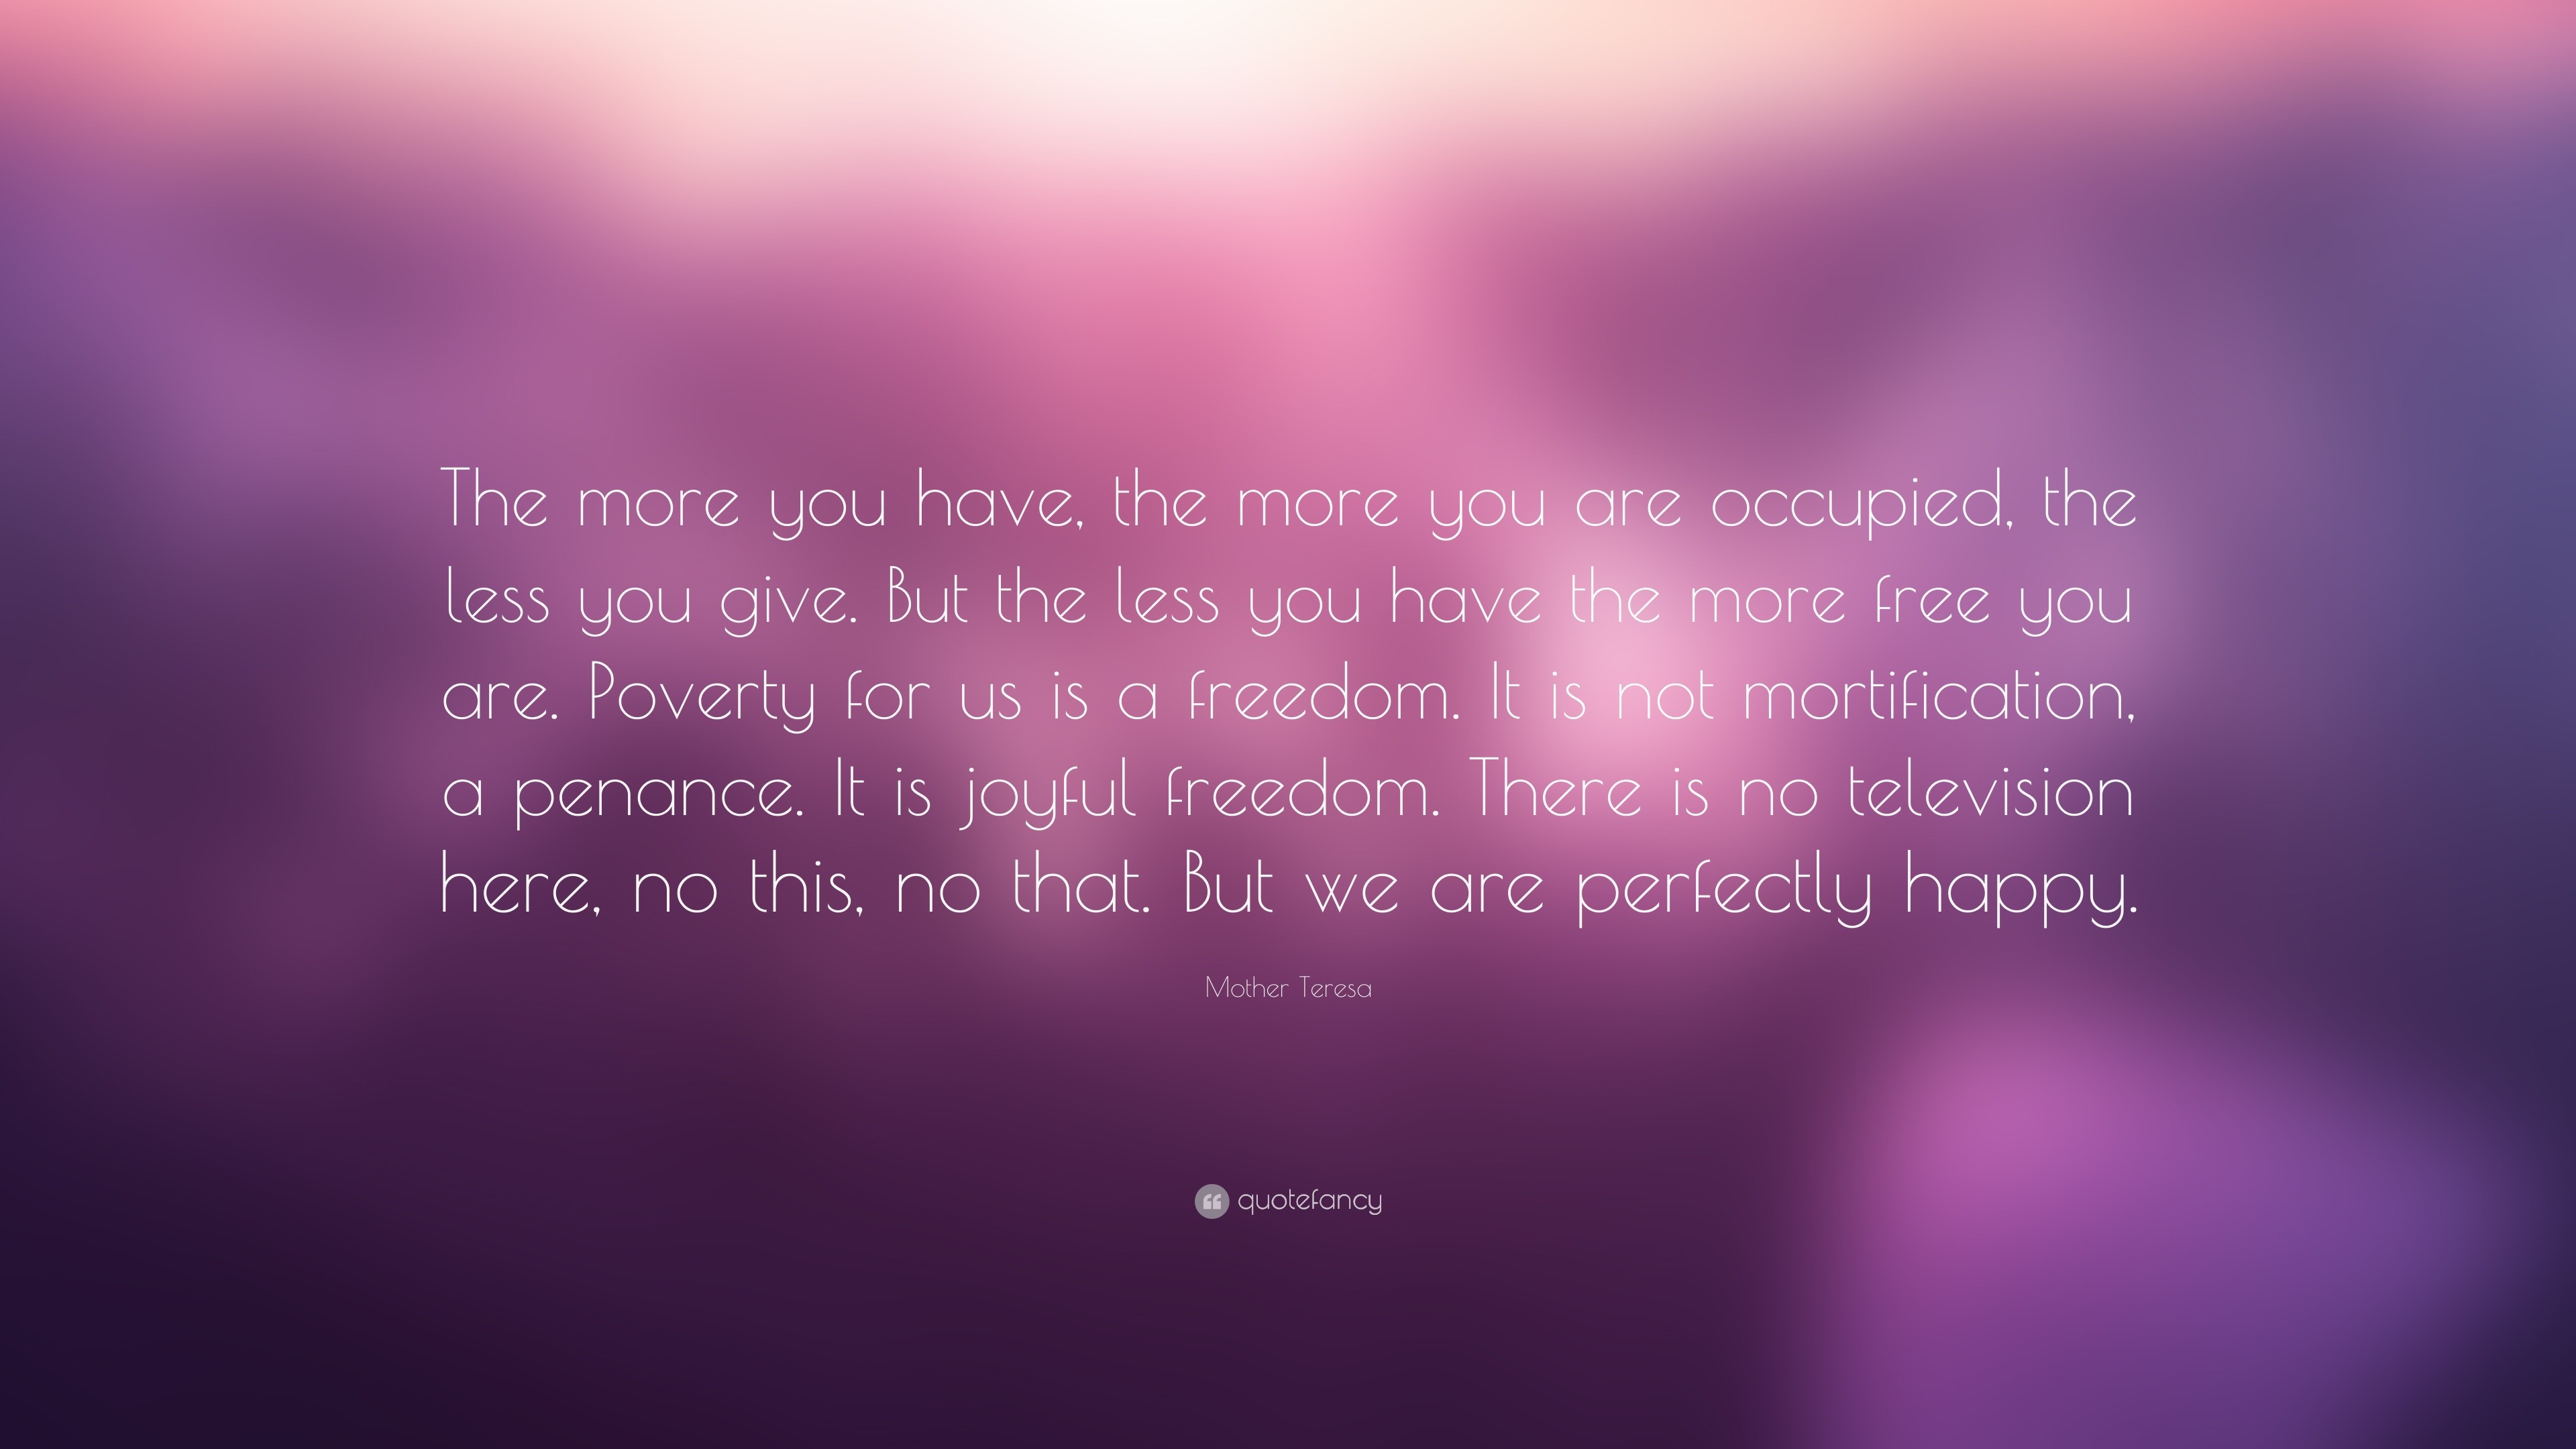 Mother Teresa Quote: “The more you have, the more you are occupied, the ...